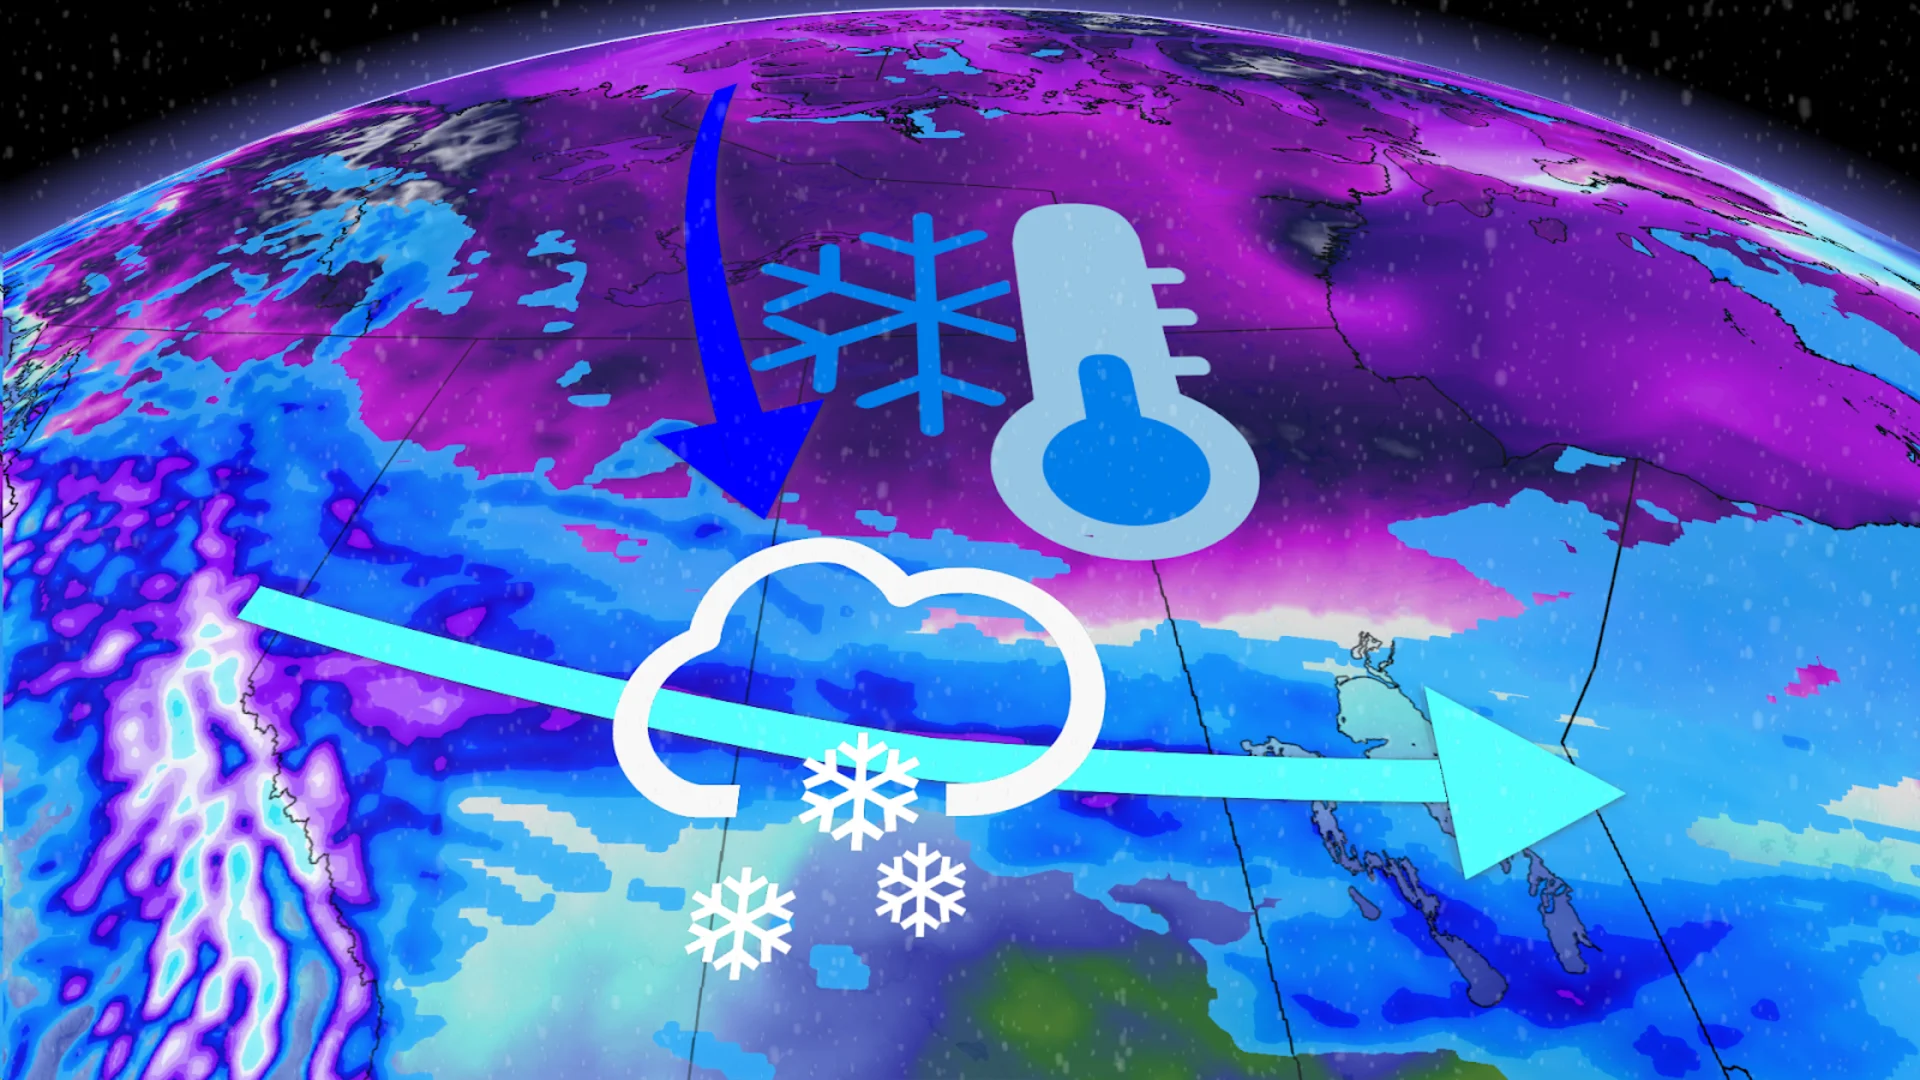 Miss winter? Snowy weekend, chilly week on tap for the Prairies